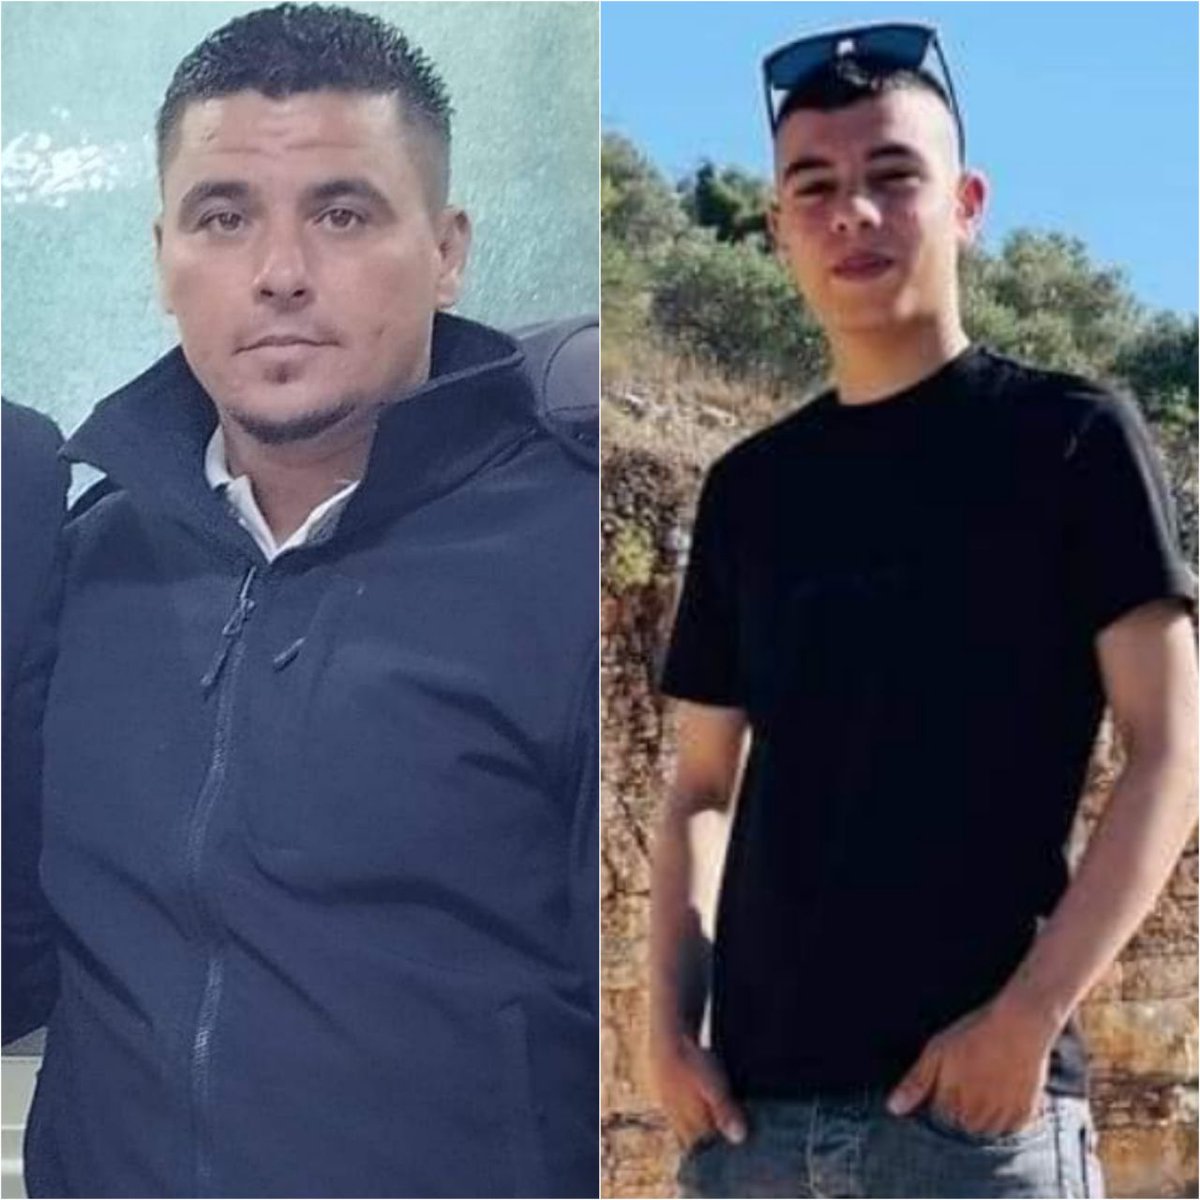 ⭕ Zionist occupying forces re-kidnapped freed captive Nimr Asira and the boy, Muhammad Saleh, after storming their homes in the village of Asira al-Qibliya, south of Nablus. #WestBank